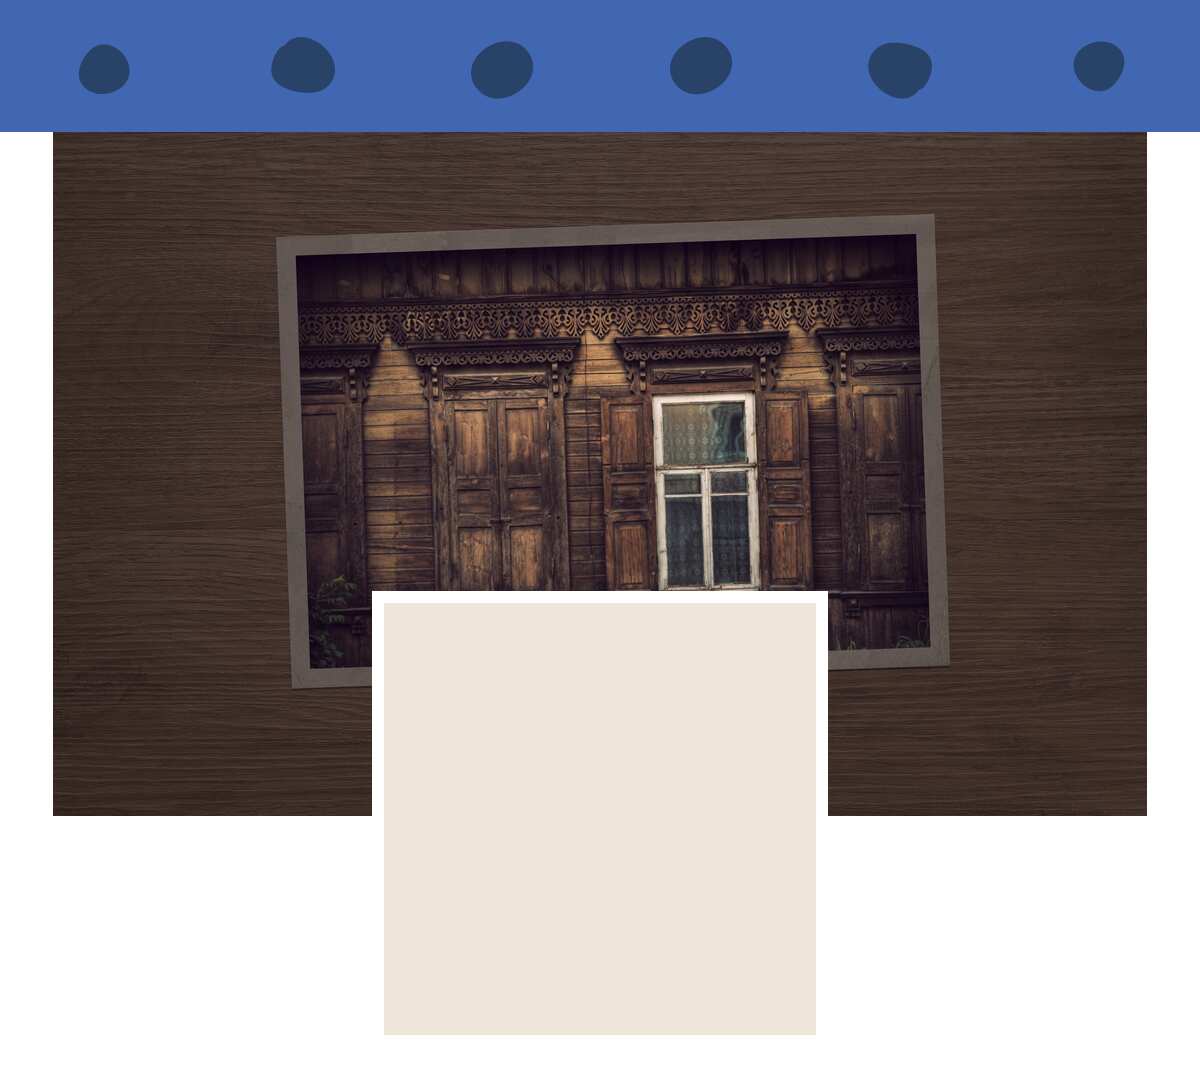 Siberian Wooden Houses, 5: preview